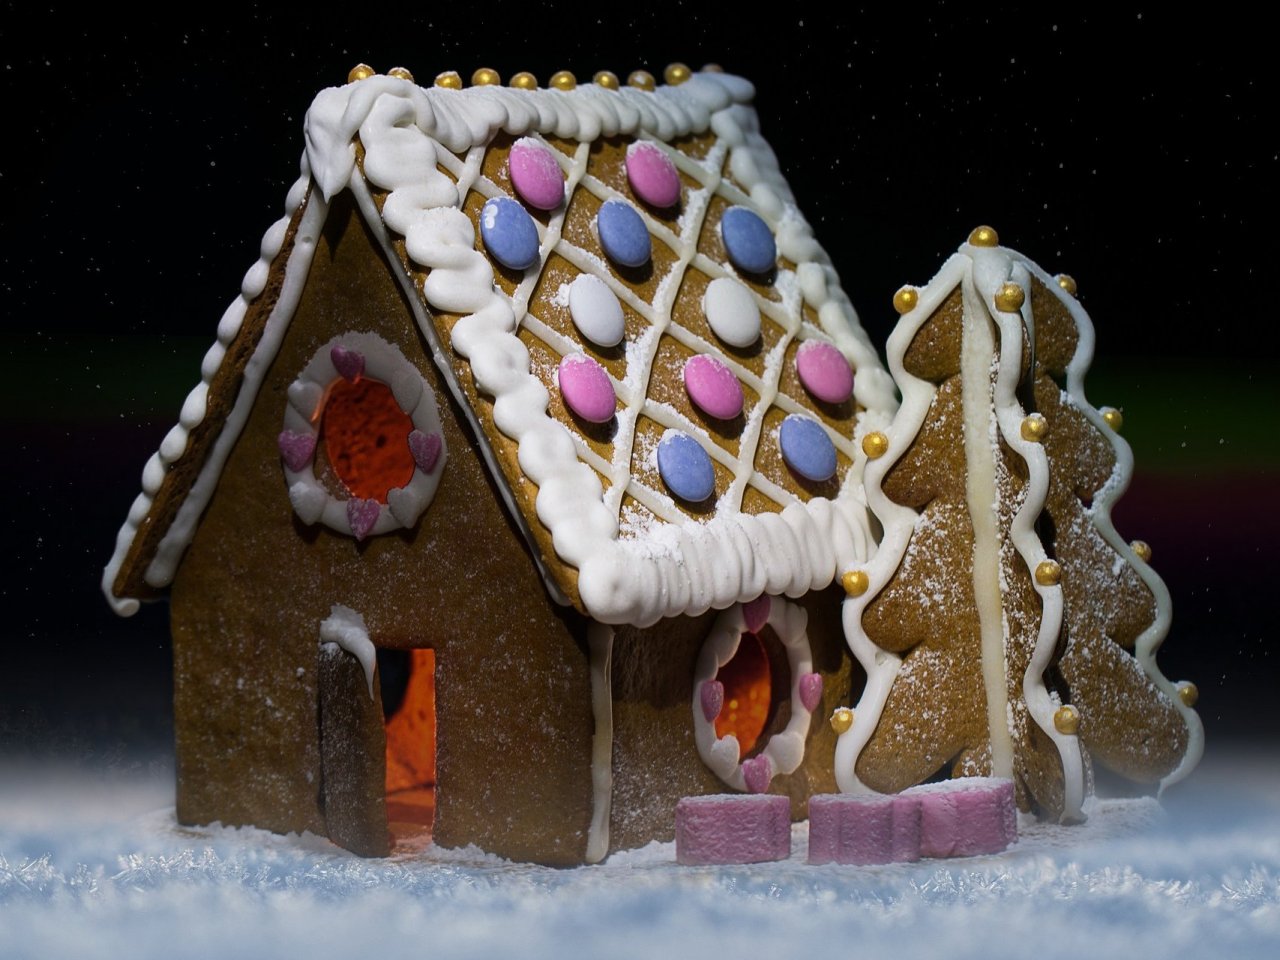 Gingerbread house jigsaw puzzle